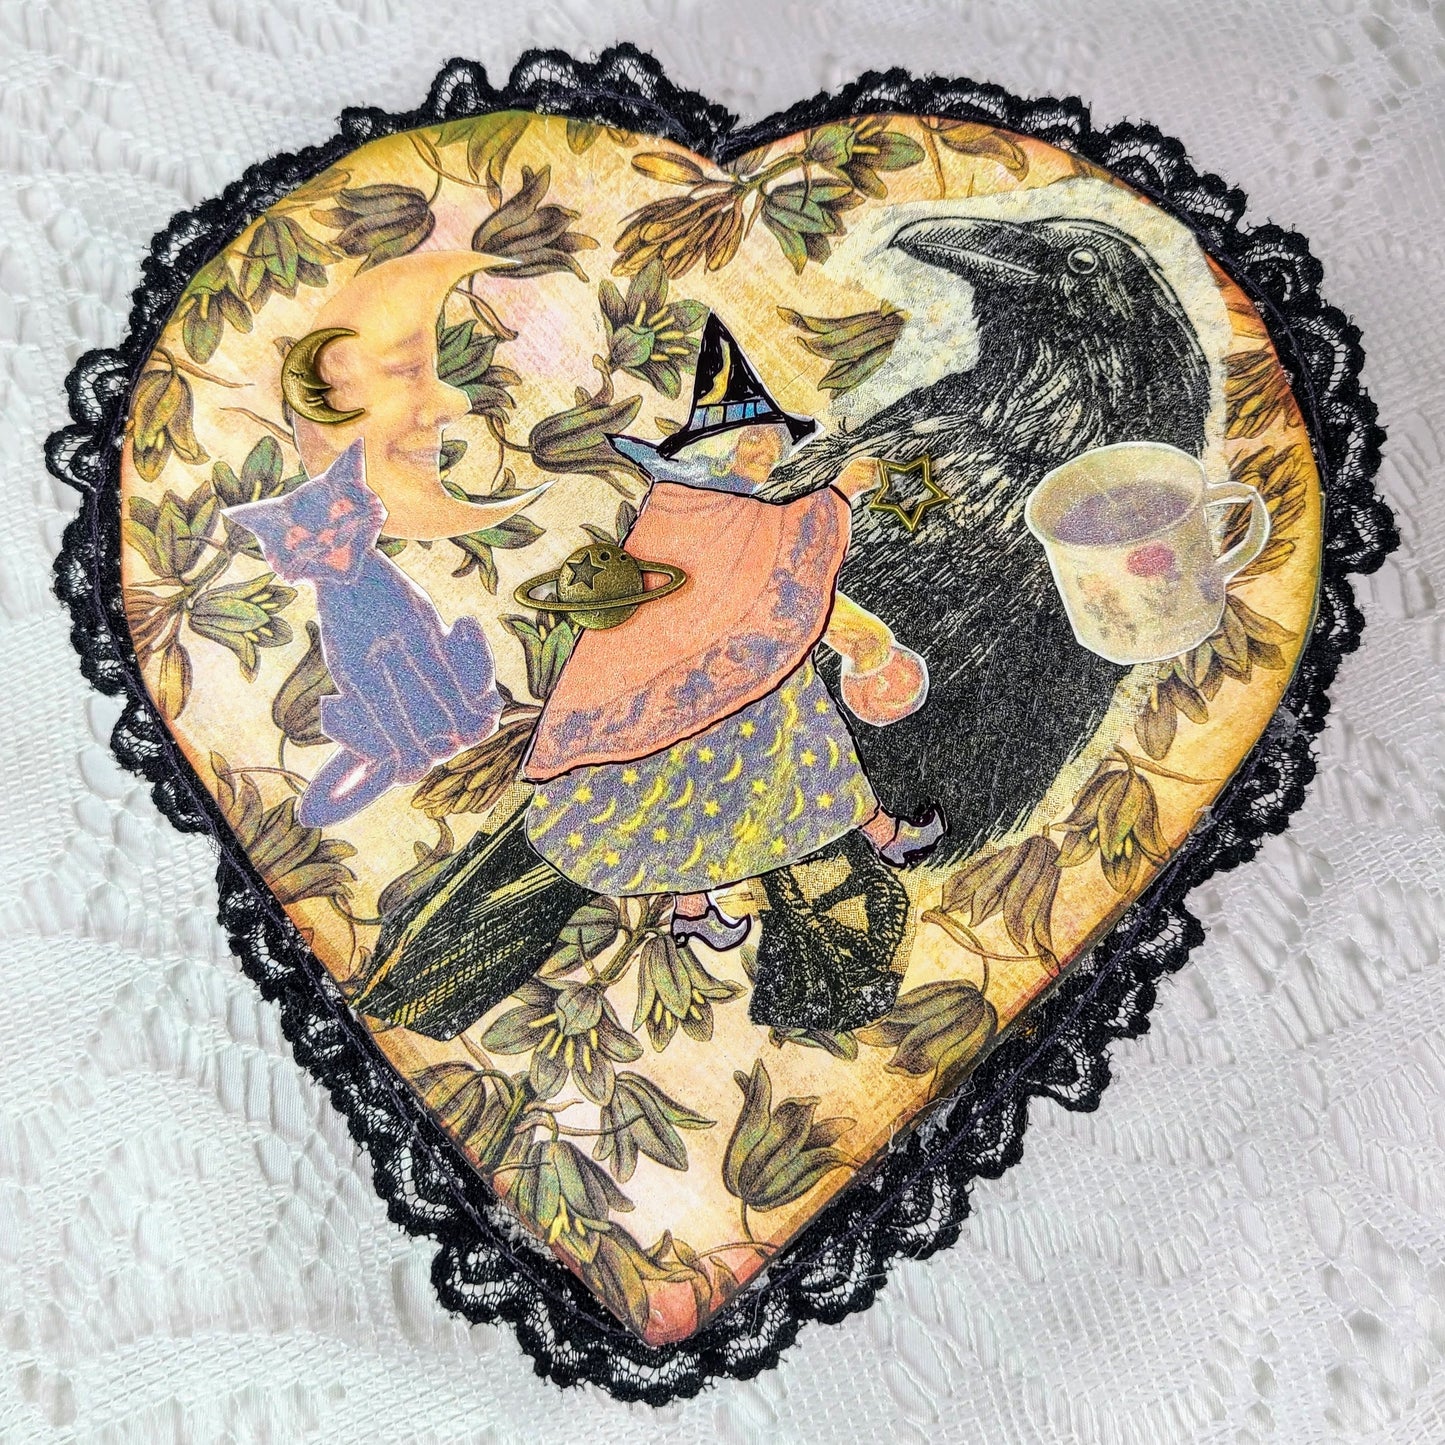 Unique Raven Witch Collage Mixed Media Heart Shaped Trinket Box ~ Love Magick ~ Filled with Goodies ~ OOAK Box plus Mini Love Candle, Spell Jar, Fairy Bell and Crystals ~ Valentine's Day Gift